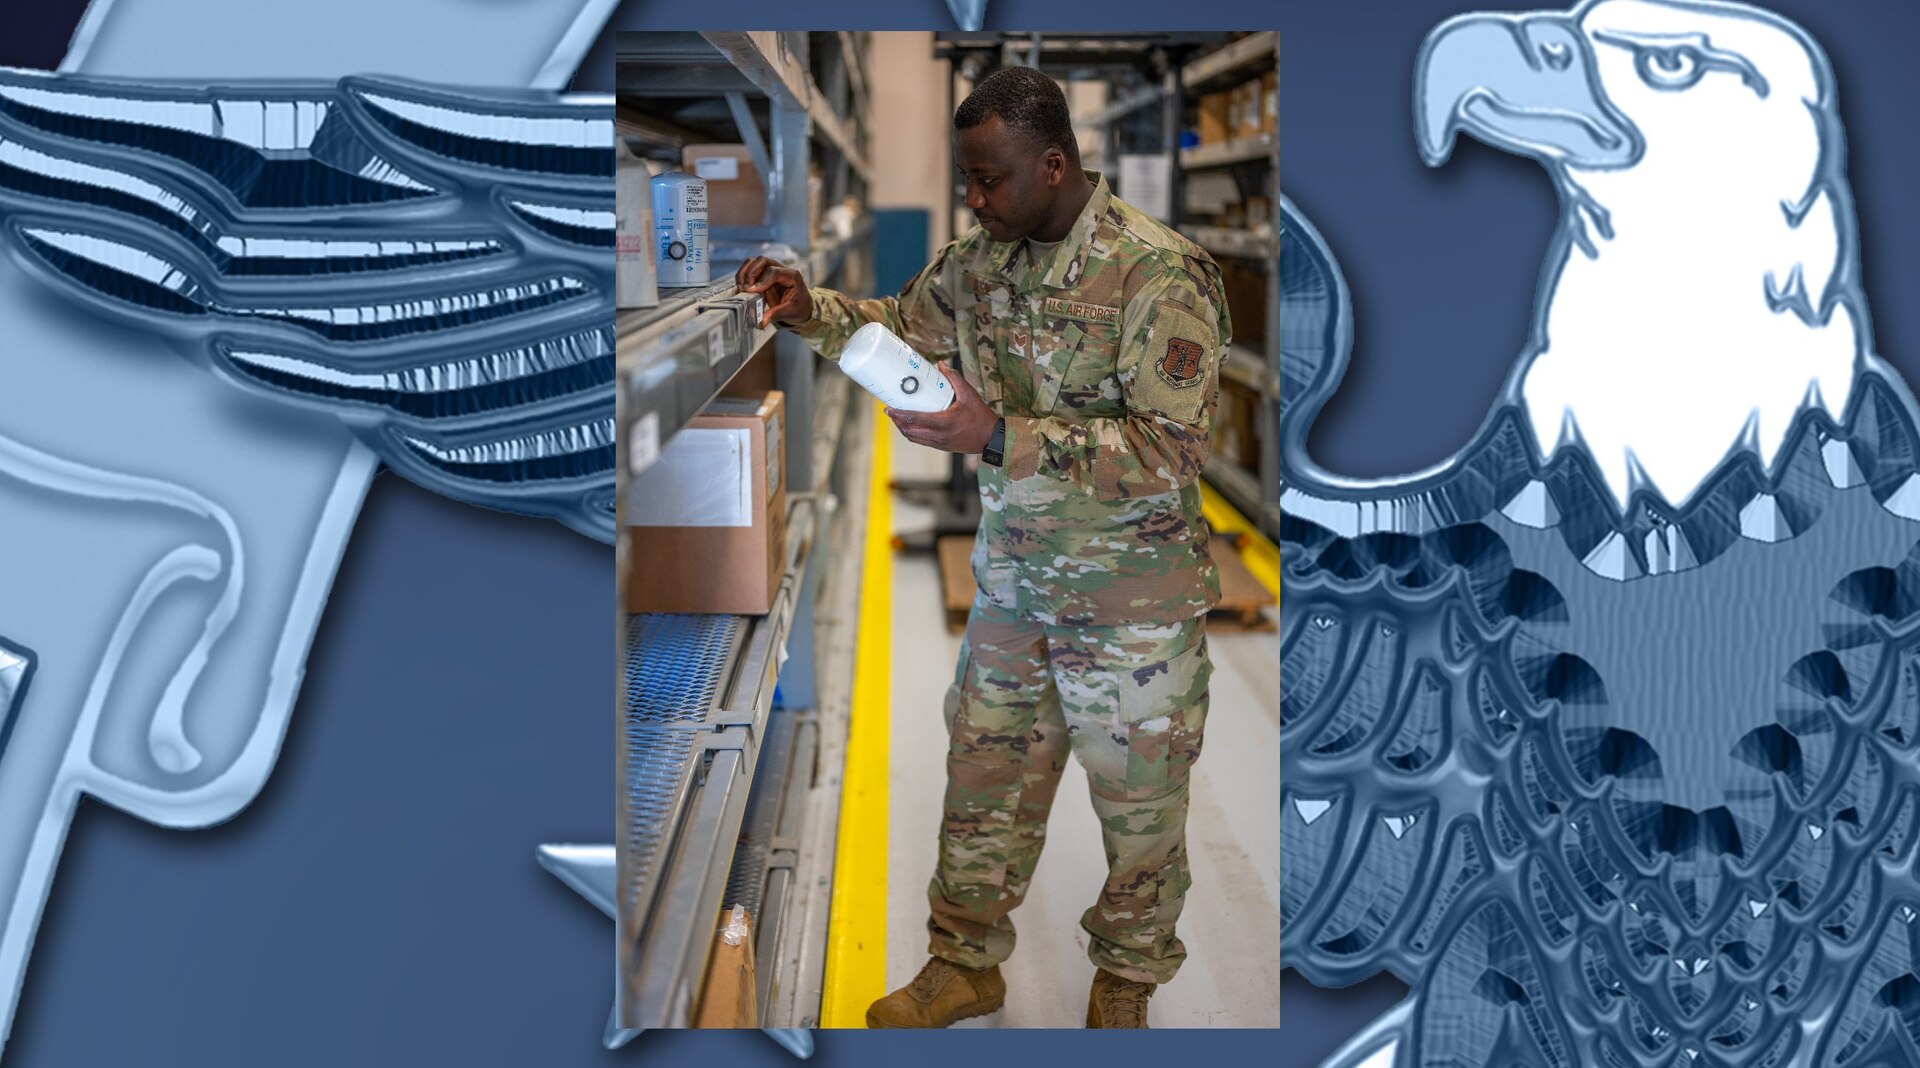 Staff Sergeant Salem Dogbe, Individual Equipment Element, 168th Wing Logistics Readiness Squadron, crosschecks stock numbers on an inventory item at Eielson Air Force Base, Alaska, June 6th, 2021. LRS is tasked with ensuring the Airmen of the 168th Wing, Alaska Air National Guard, are supplied with the equipment and clothing they require for mission success, especially in the arctic environment of Alaska. (U.S. graphic by Michael Hong)